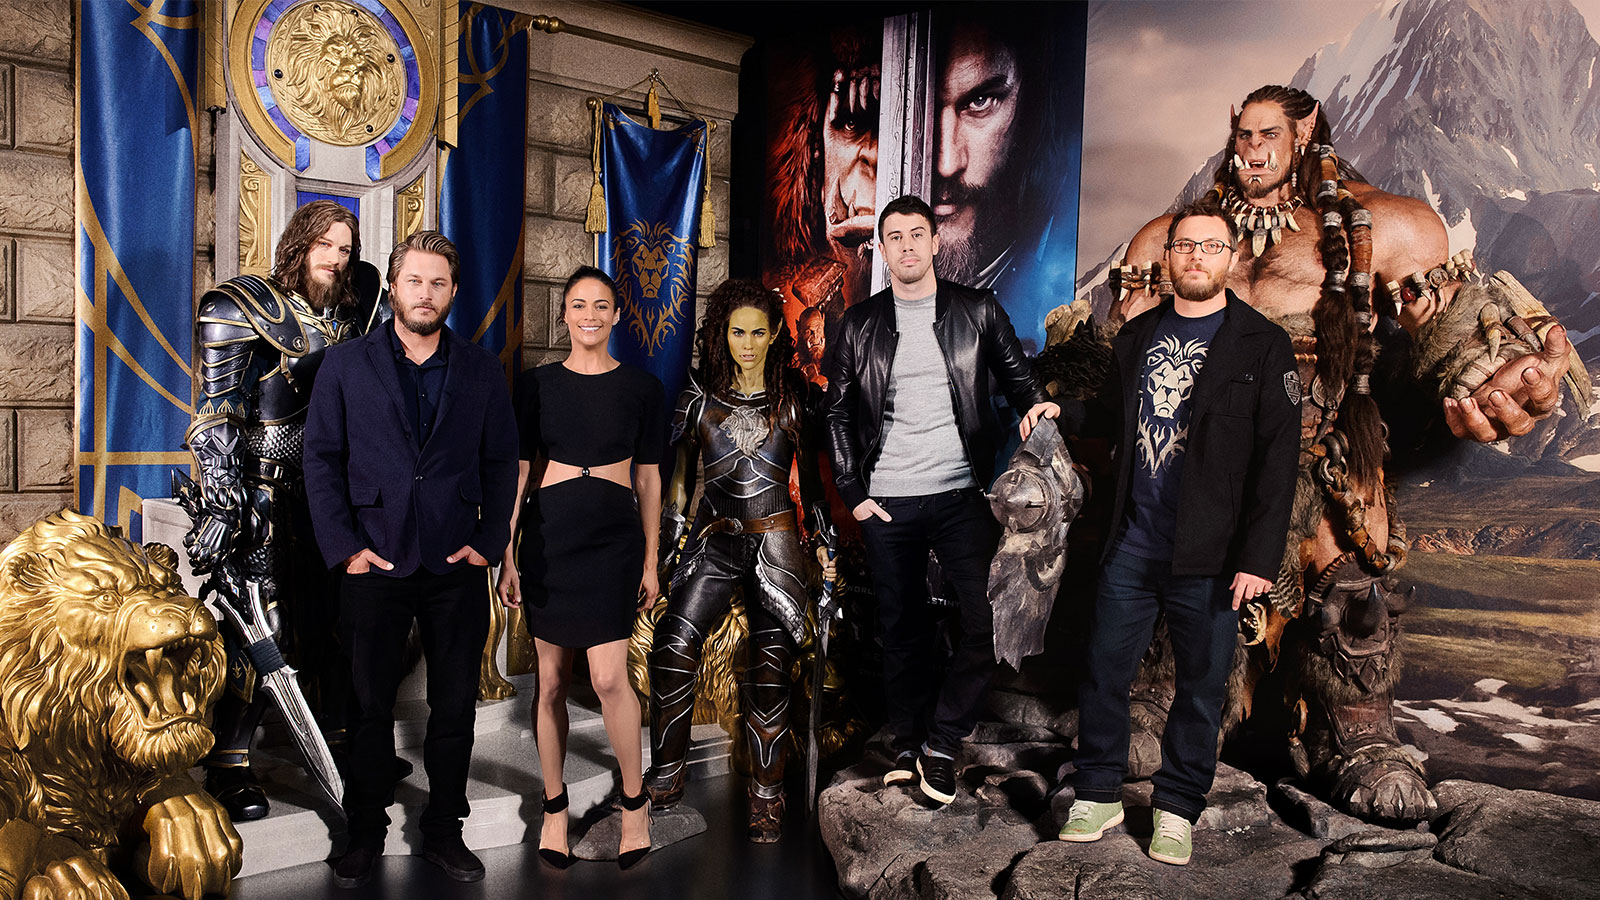 STARS LAUNCH WARCRAFT EXPERIENCE AT MADAME TUSSAUDS LONDON